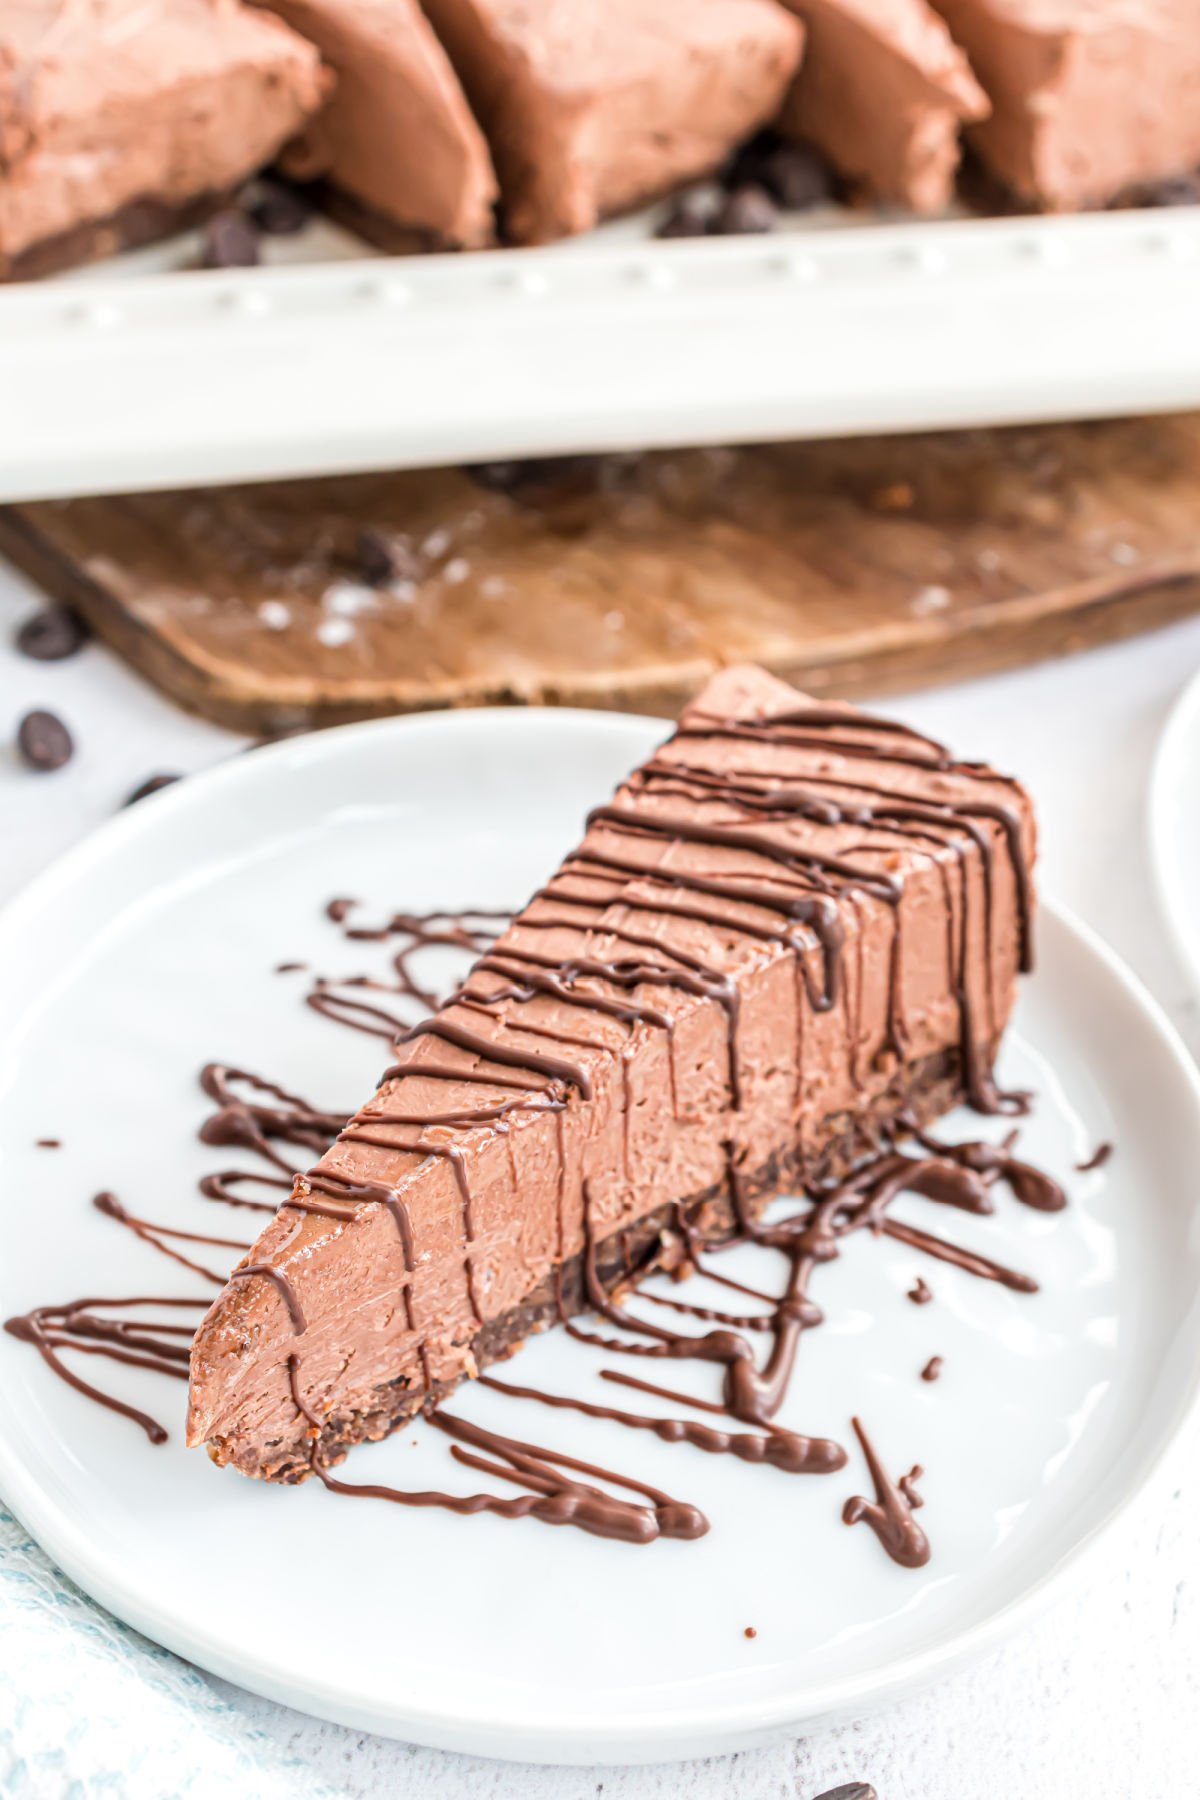 Sugar free chocolate cheesecake sliced and on a dessert plate.